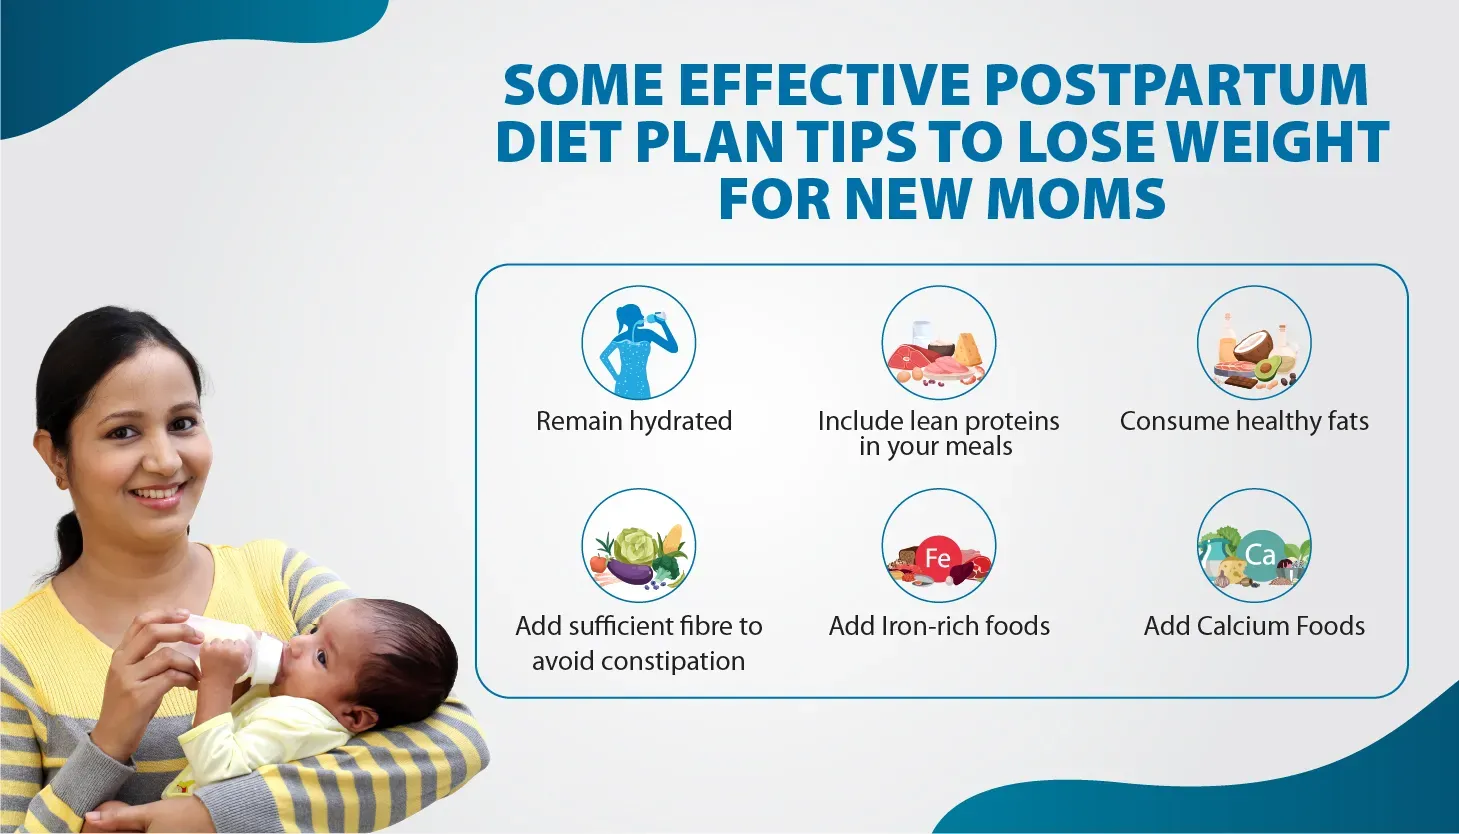 Postpartum Slimdown: Healthy Diet and Exercise Tips for New Moms